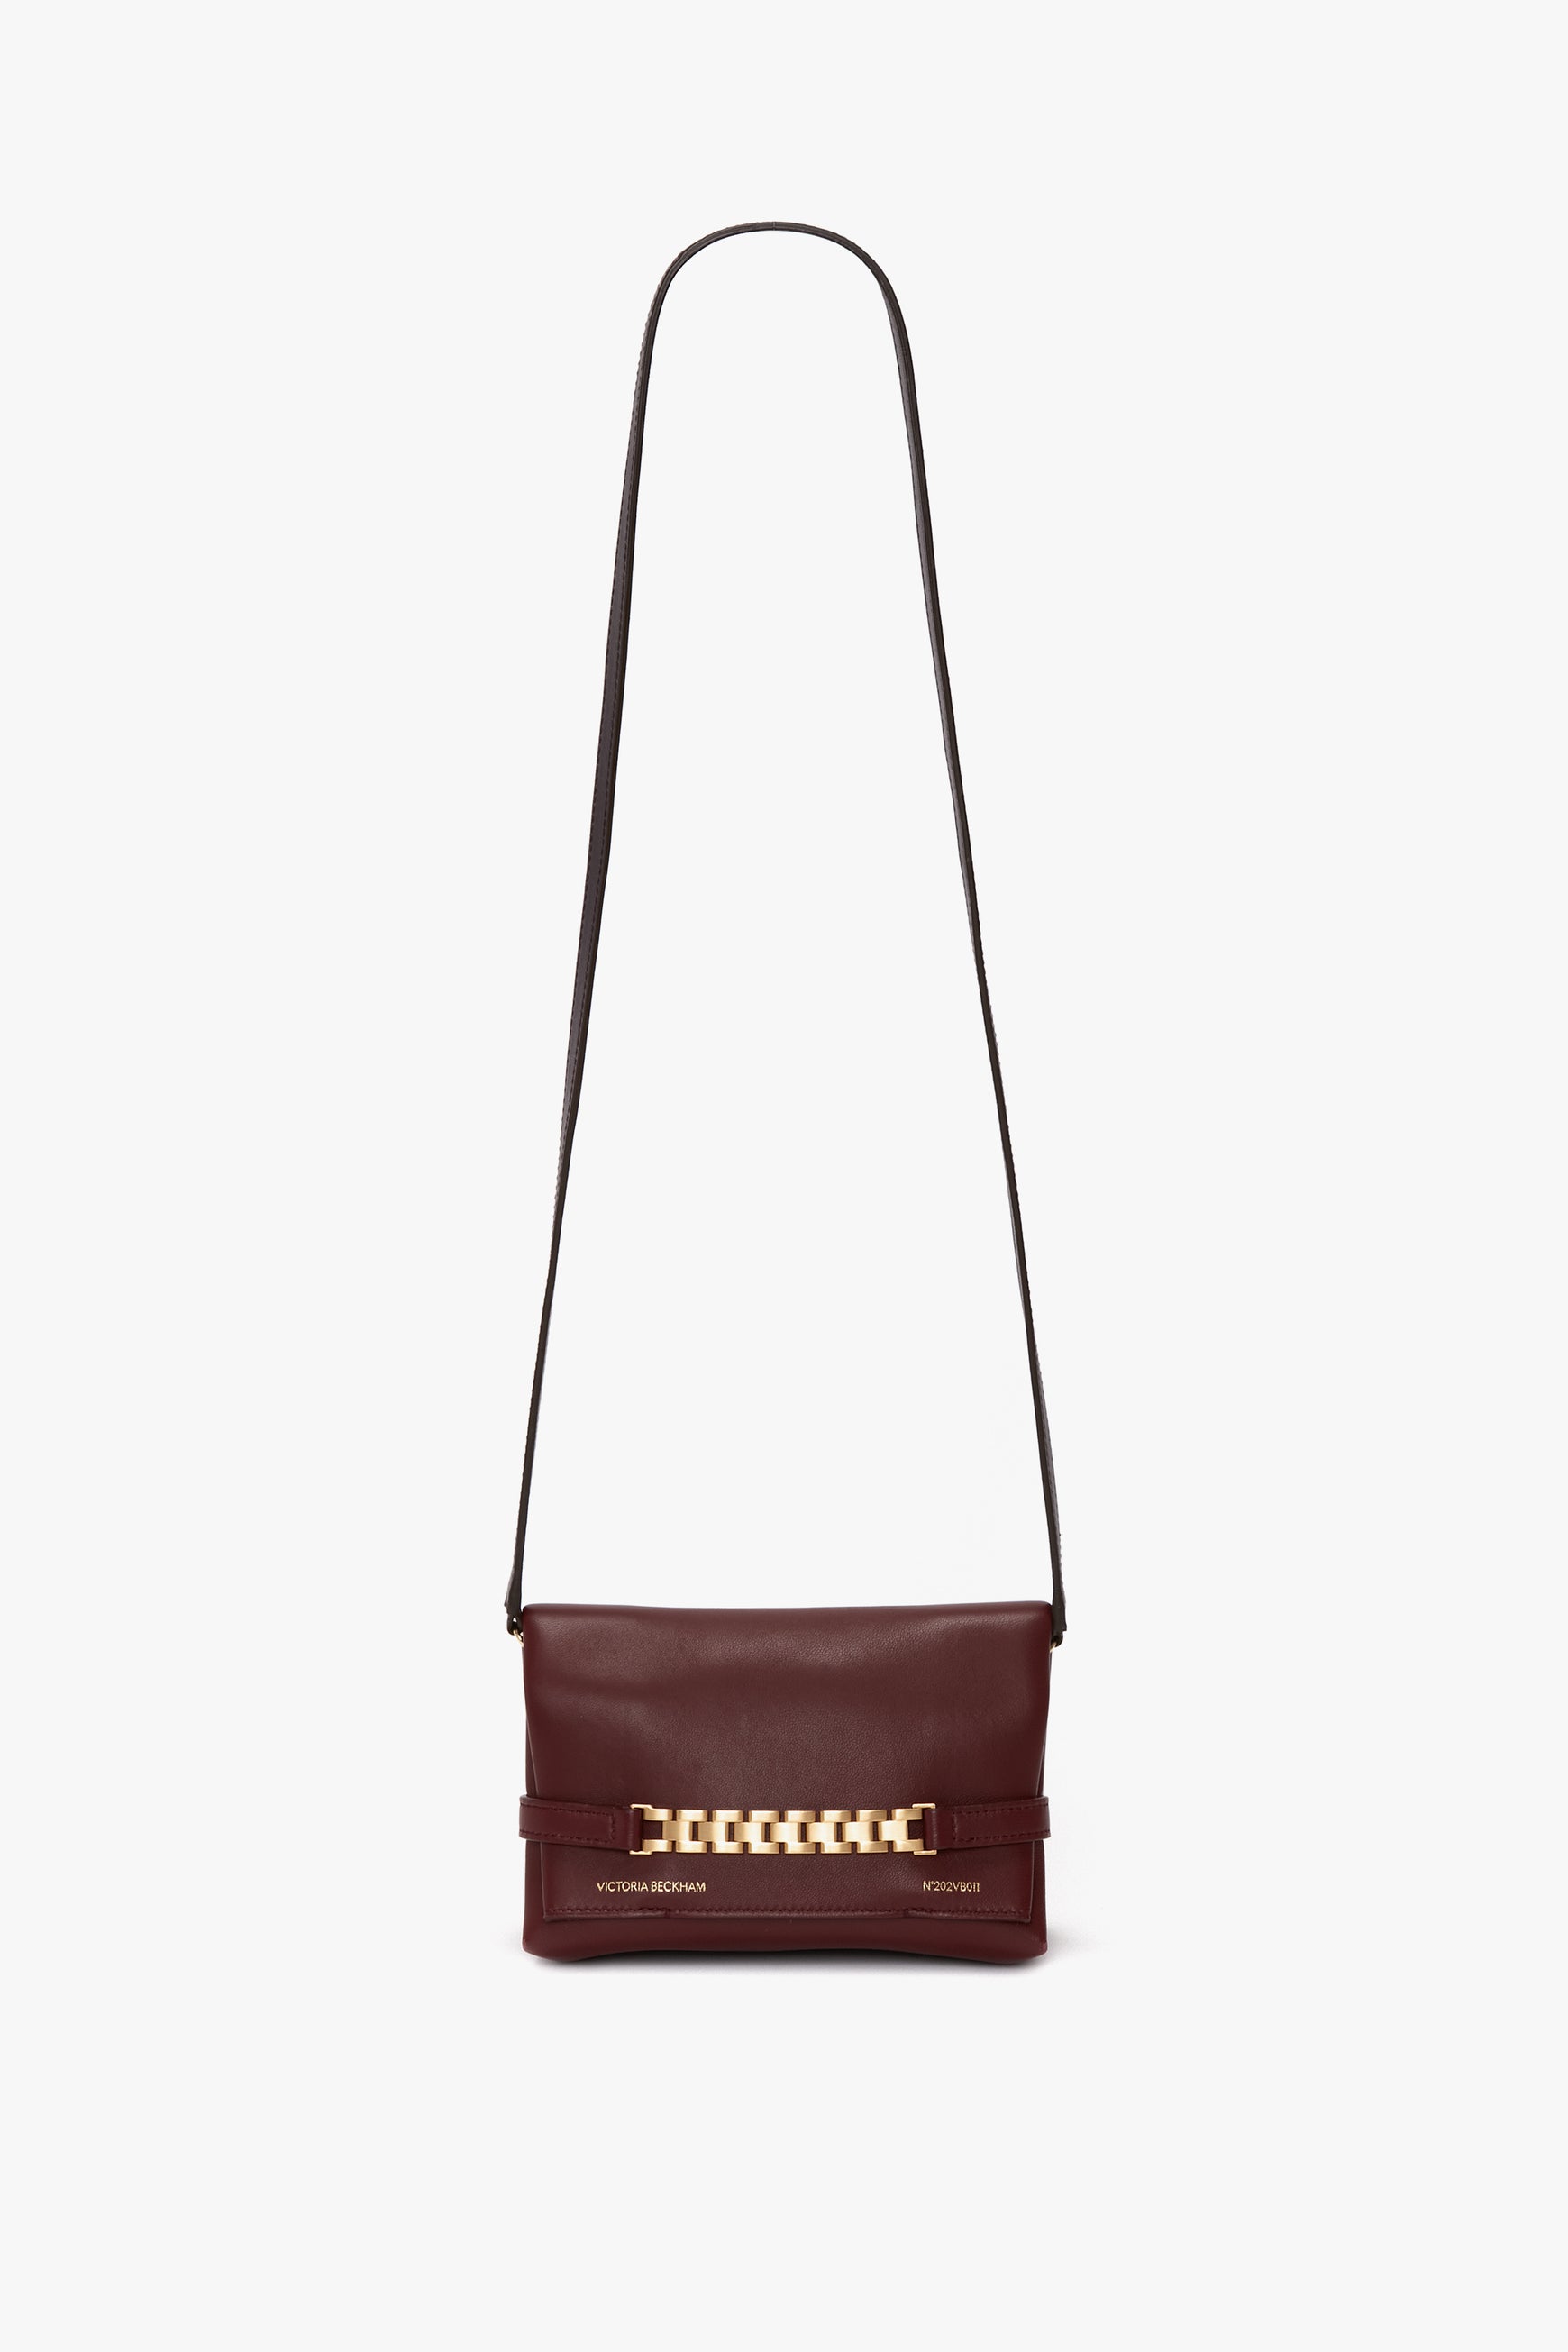 A small, burgundy leather bag featuring a gold chain accent on the front flap and a detachable strap for versatile wear. This is the Mini Chain With Long Strap Pouch Bag In Burgundy Leather by Victoria Beckham.